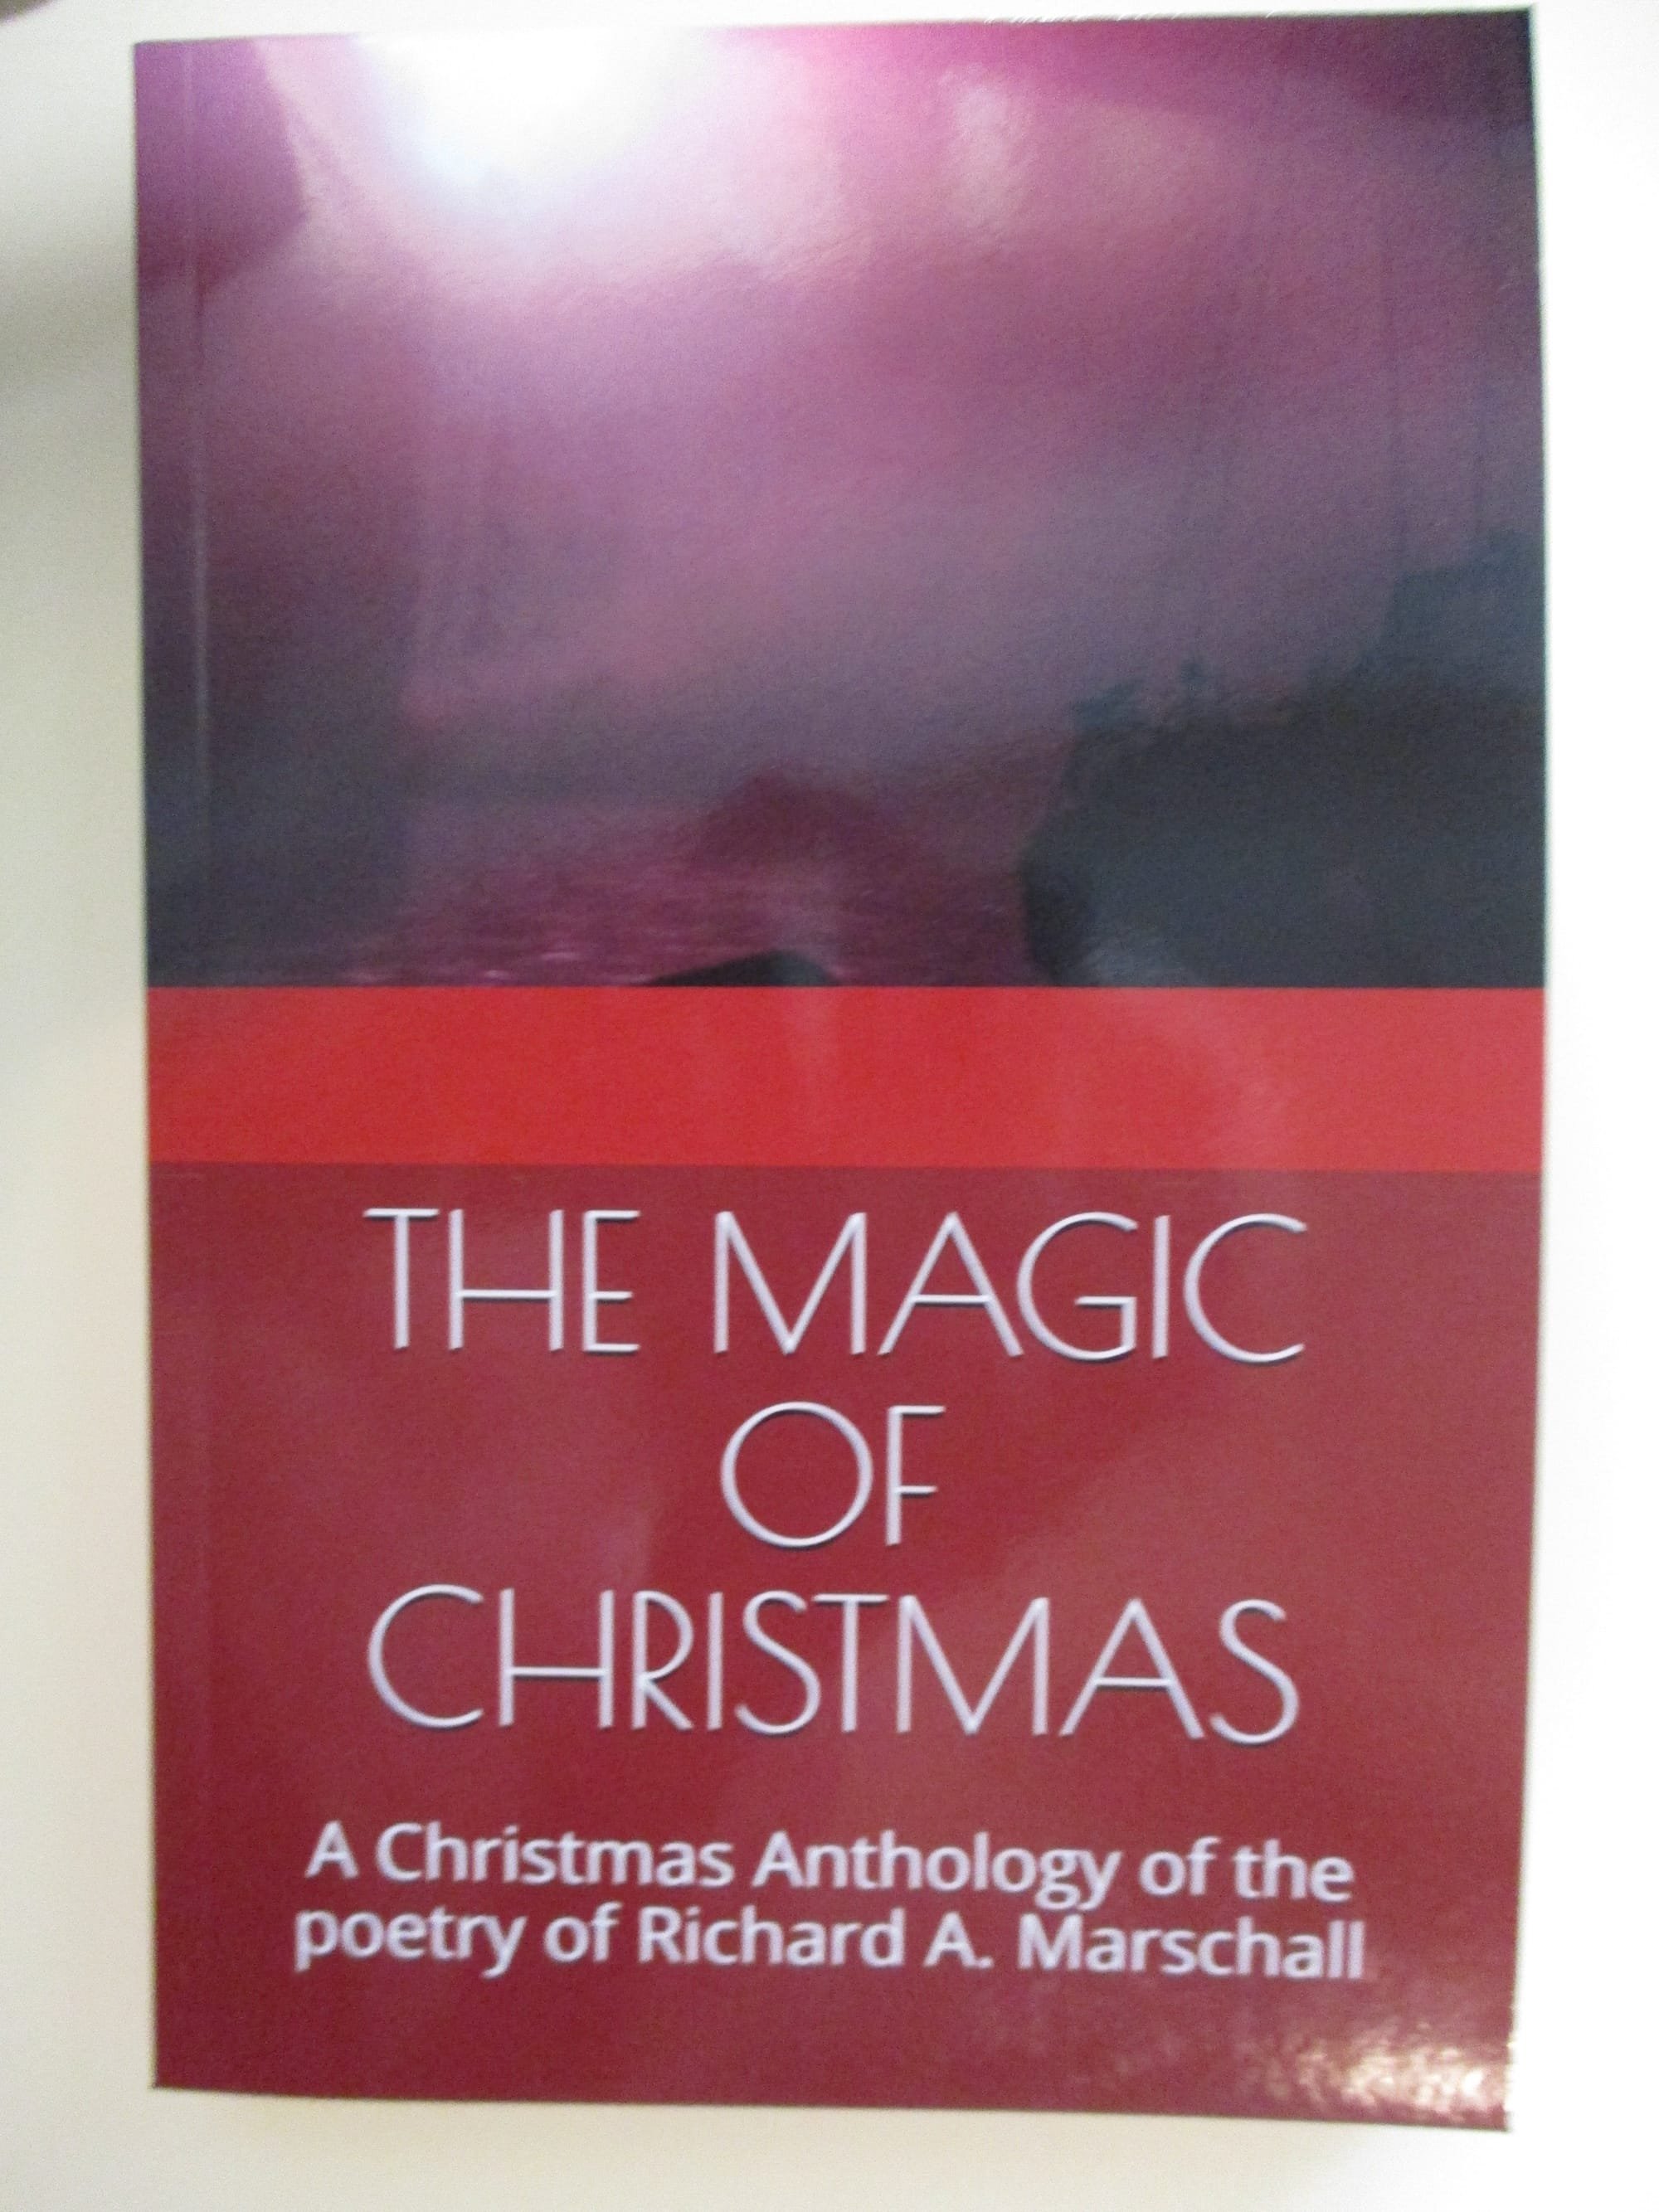 The Magic of Christmas   Book One ...  of the Christmas Poetry trilogy